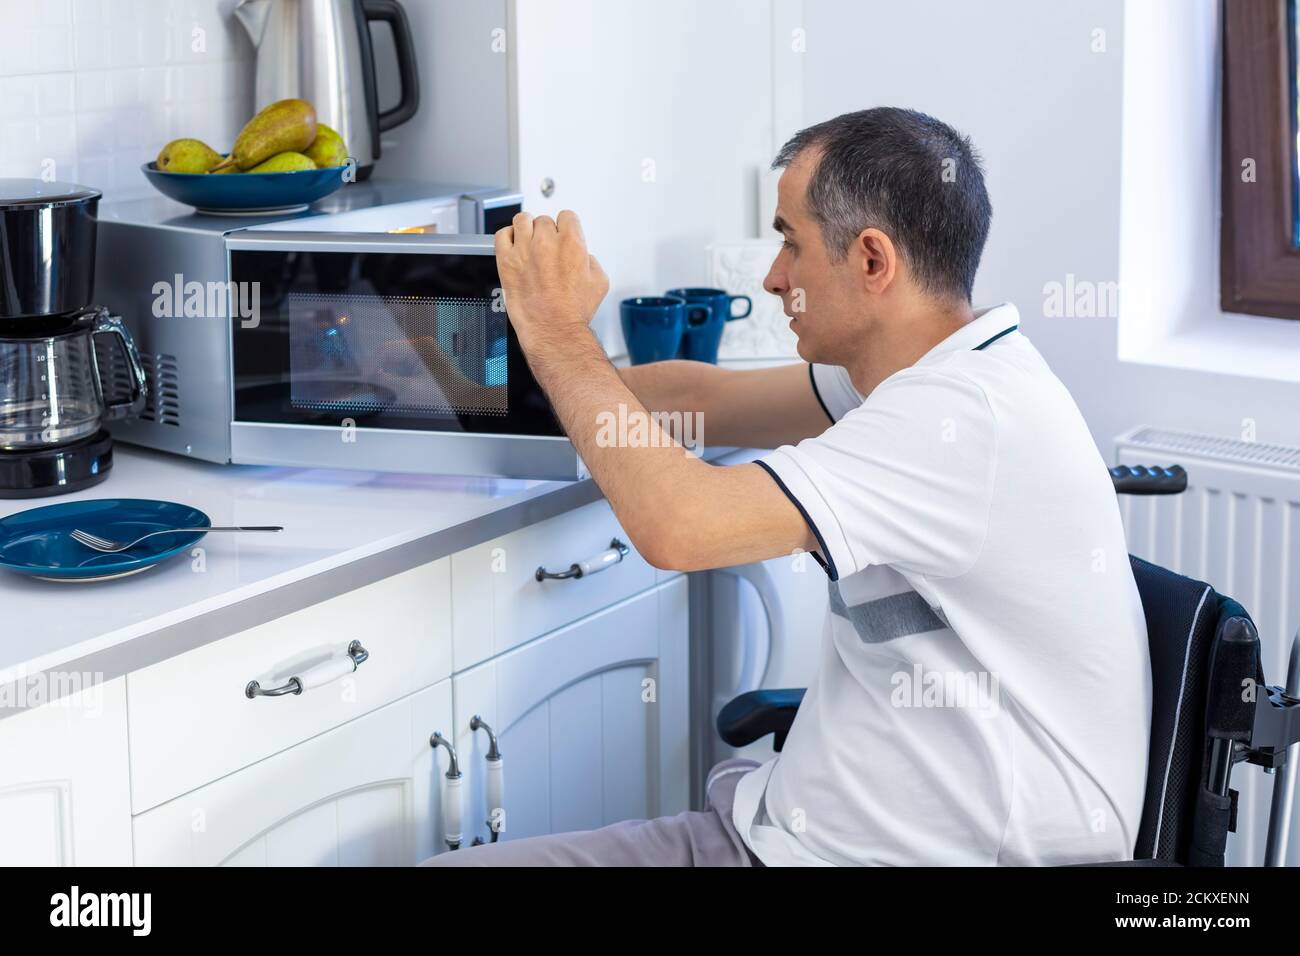 Young Man in Whellchair Using Microwave Oven For Baking In Kitchen. Focus on his hand. Stock Photo